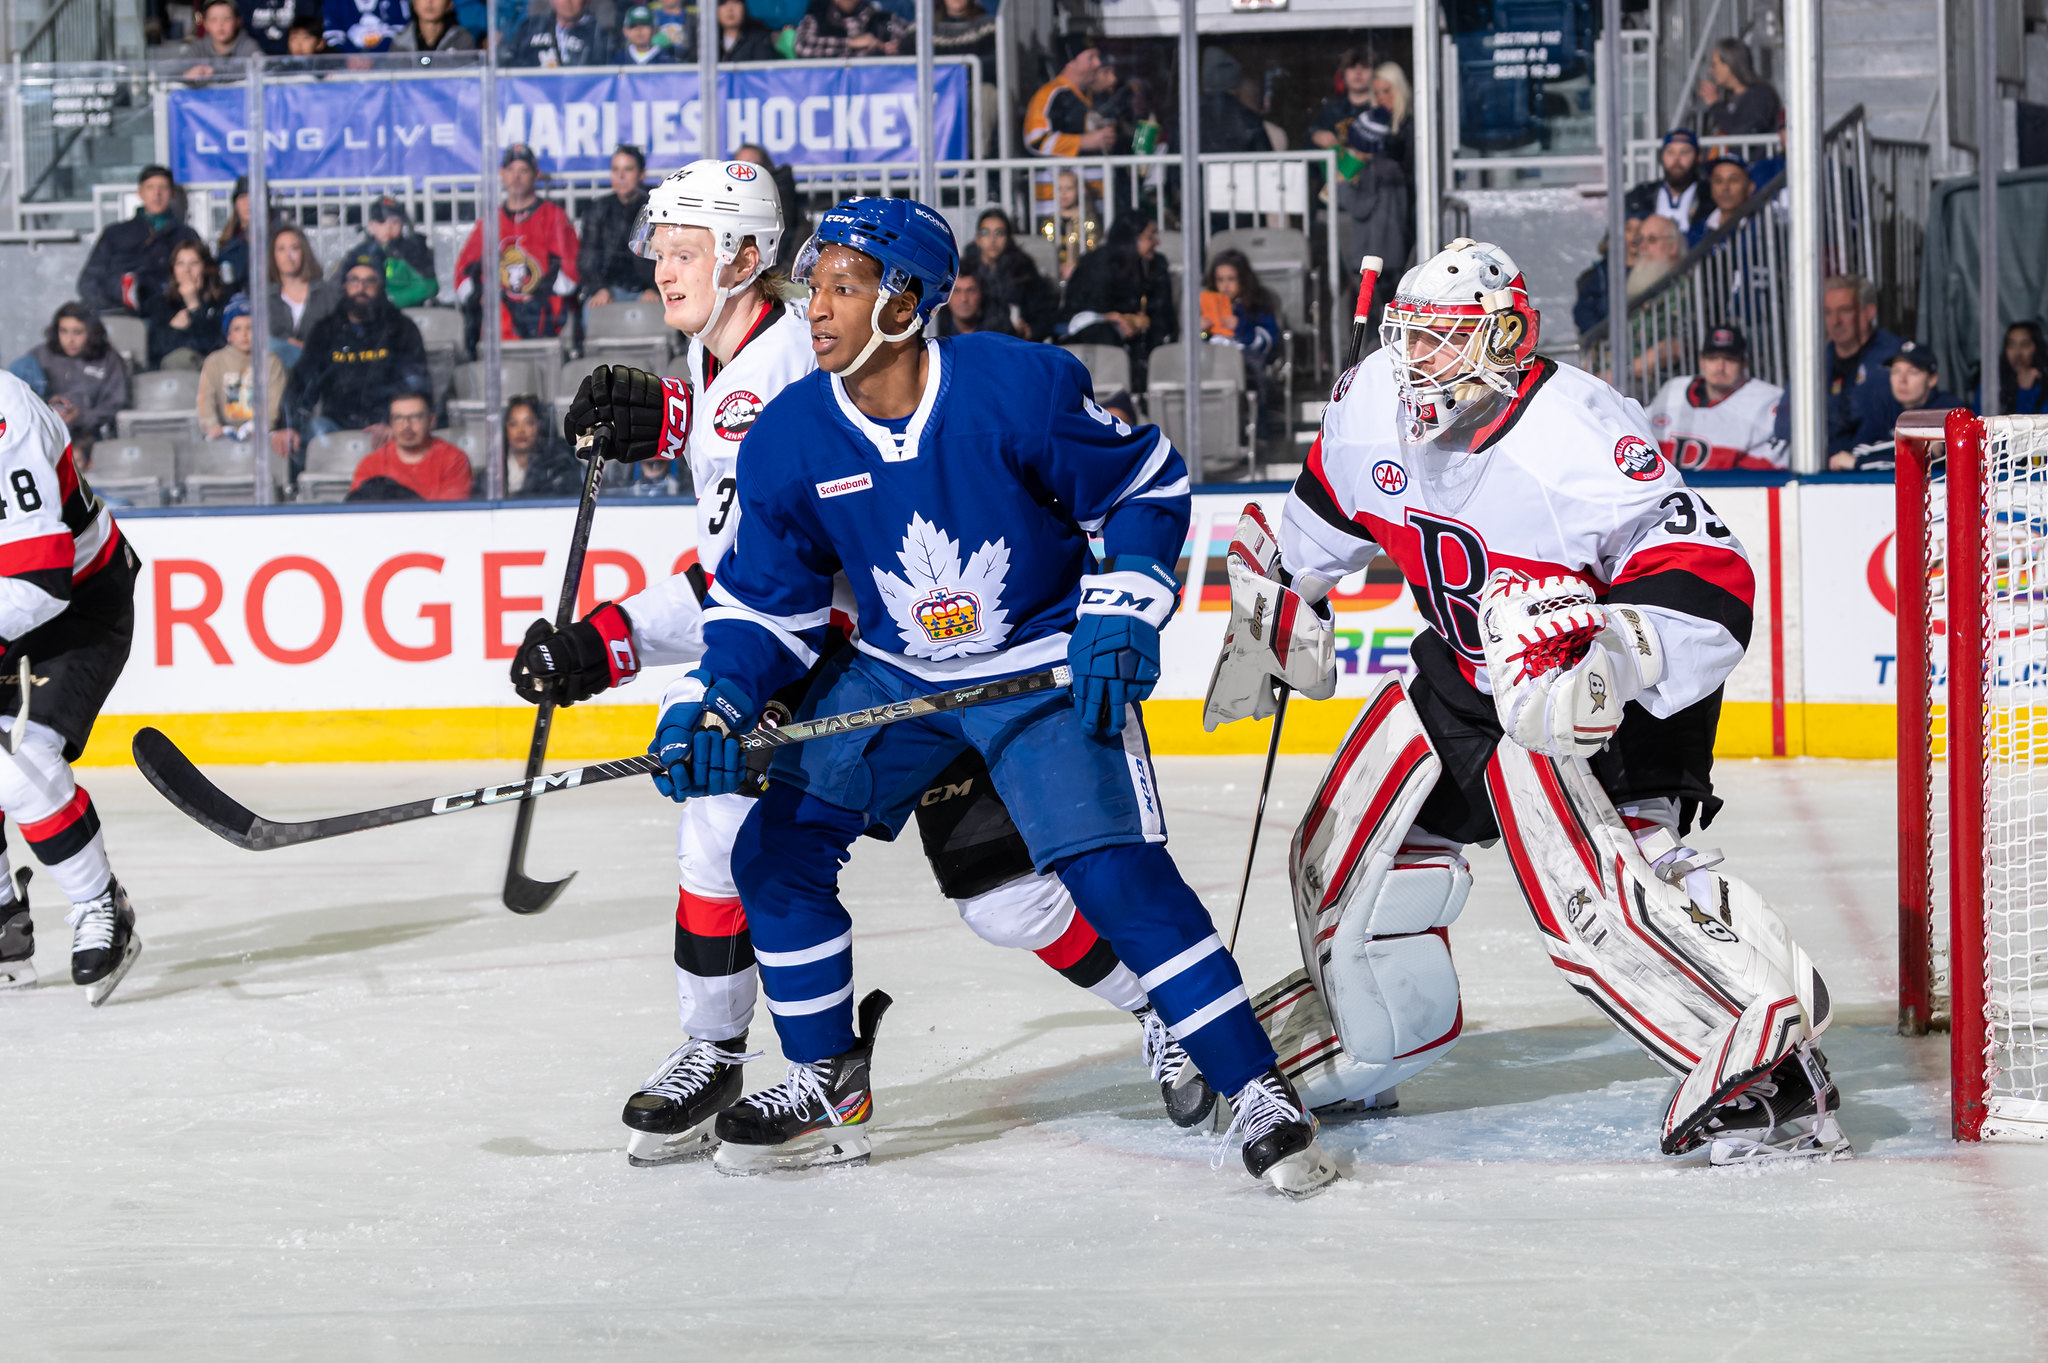 Belleville Sens conclude busy weekend with loss to Marlies